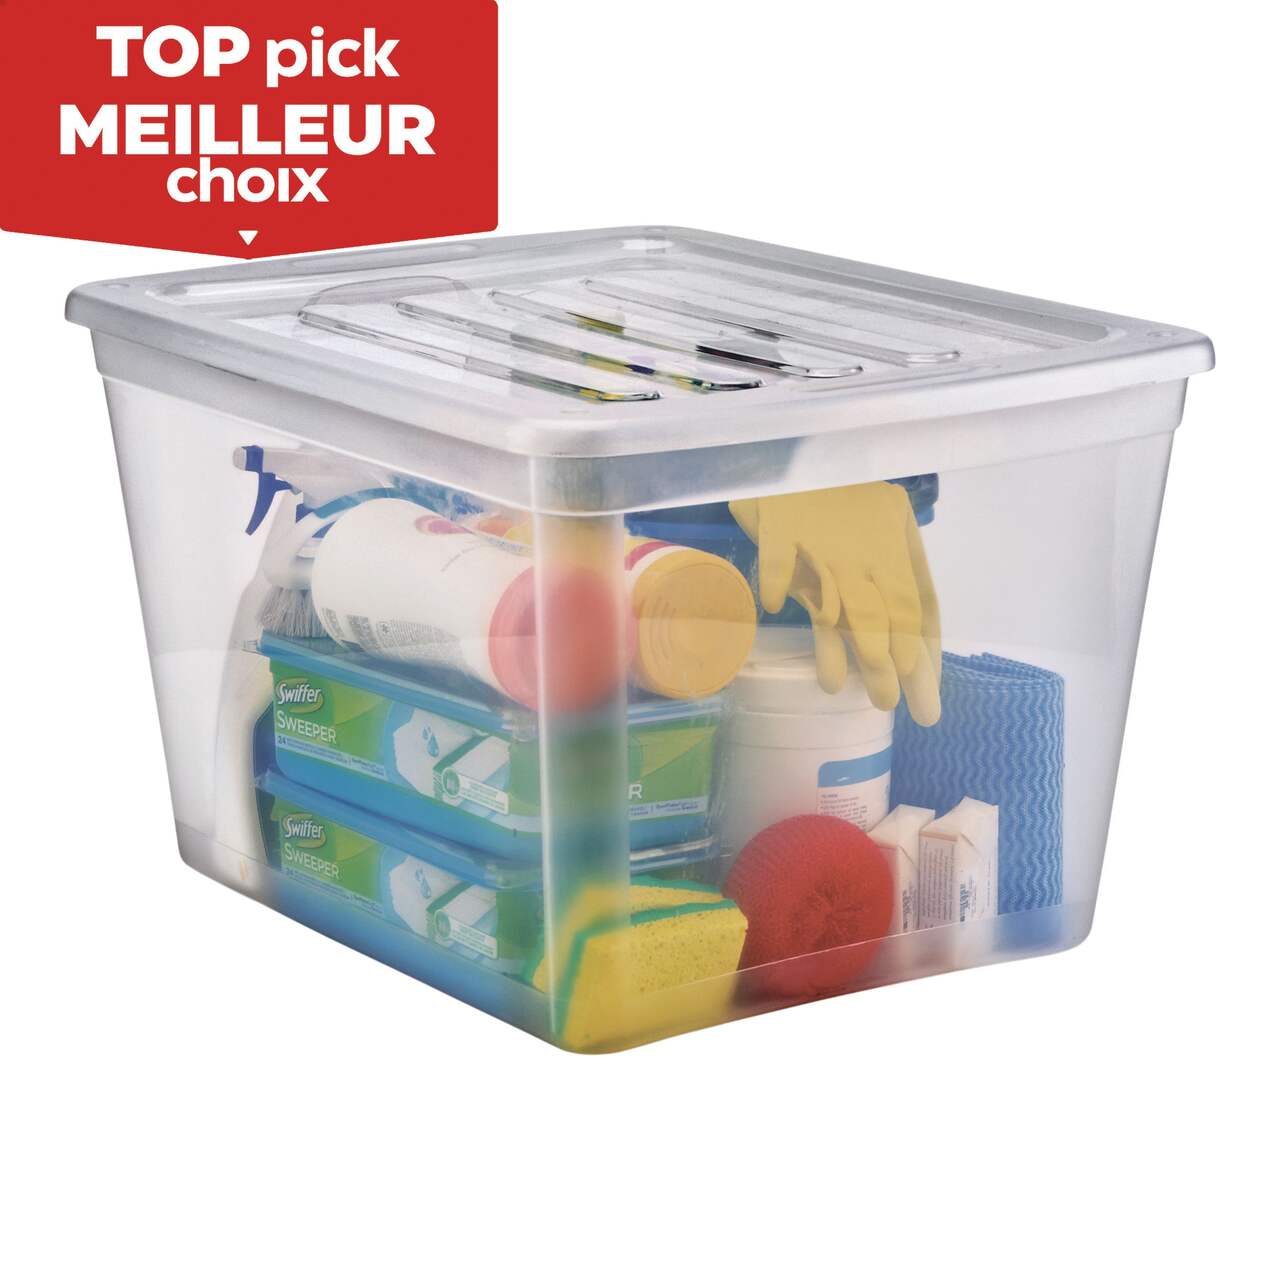 https://media-www.canadiantire.ca/product/living/home-organization/storage-solutions/1421282/80-litre-with-wheels-tote-clear-9d212ee0-81f6-4523-a4a7-01b38c94436d-jpgrendition.jpg?imdensity=1&imwidth=640&impolicy=mZoom